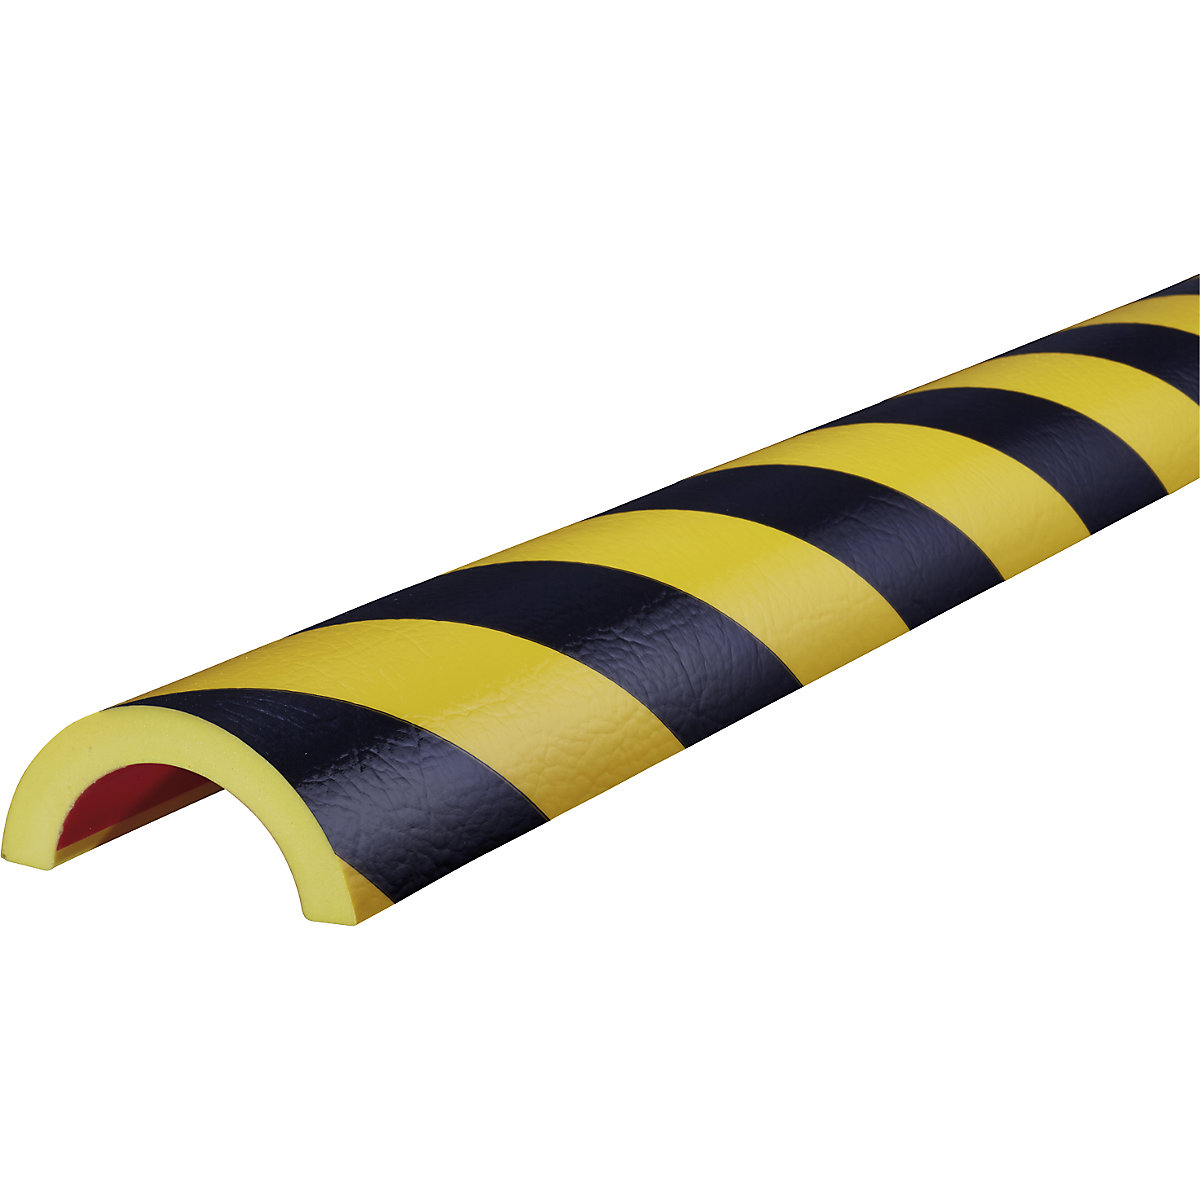 Knuffi® pipe protection – SHG, type R50, 1 m length, black / yellow-12